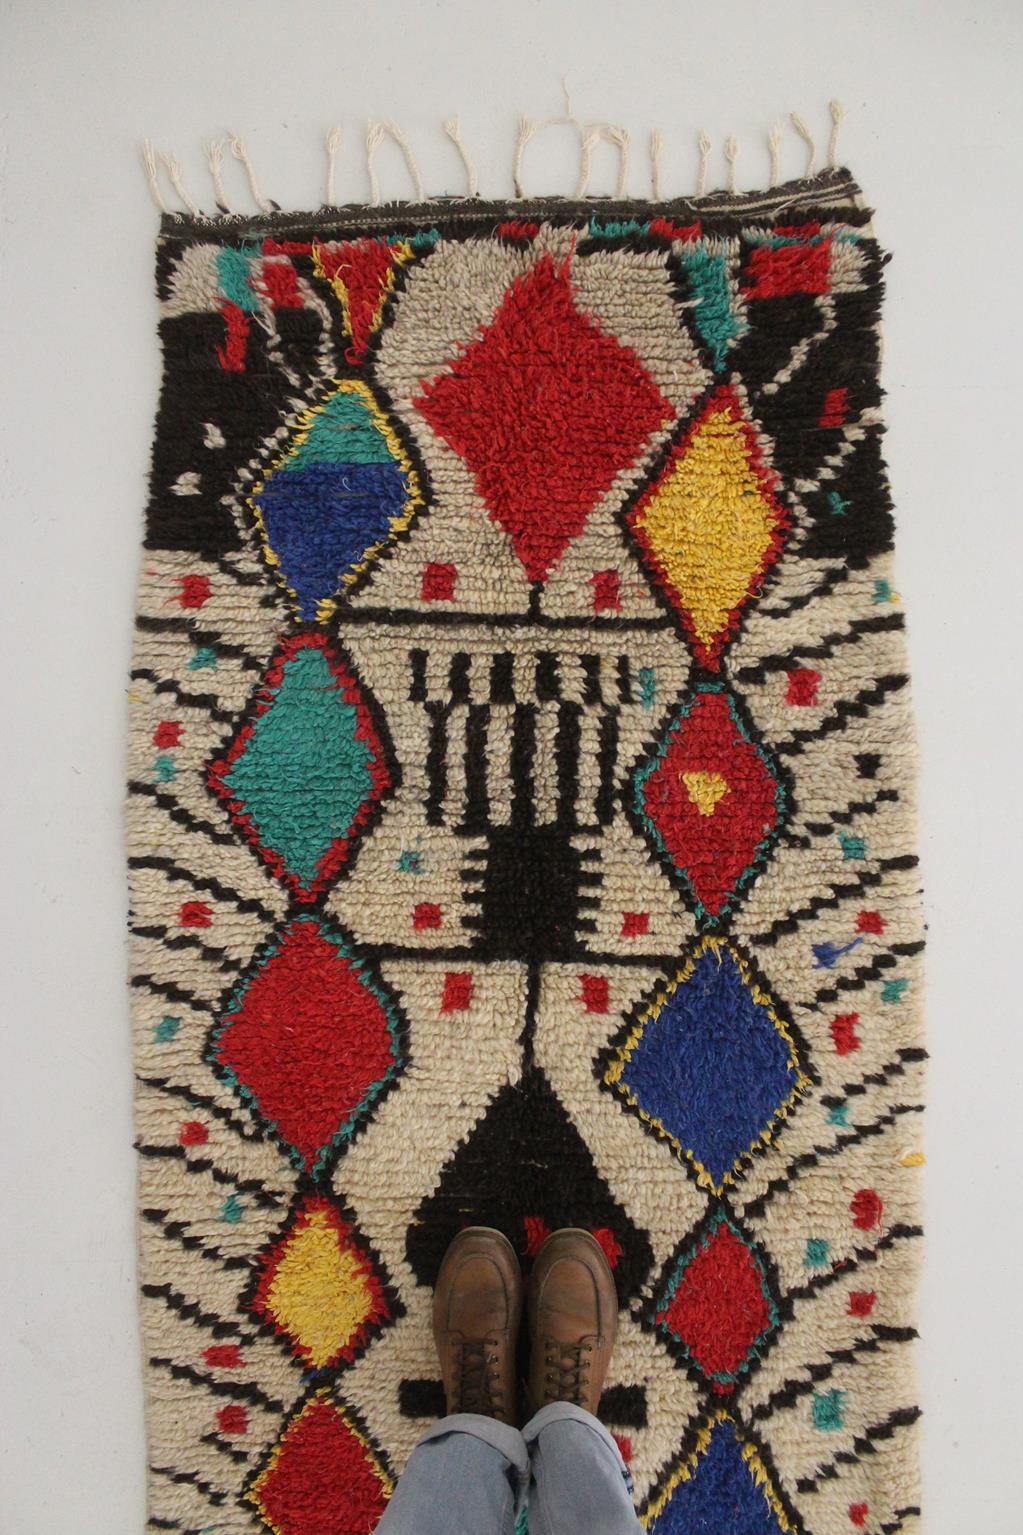 Vintage Moroccan Azilal runner rug - 3.1x11.3feet / 95x345cm For Sale 3